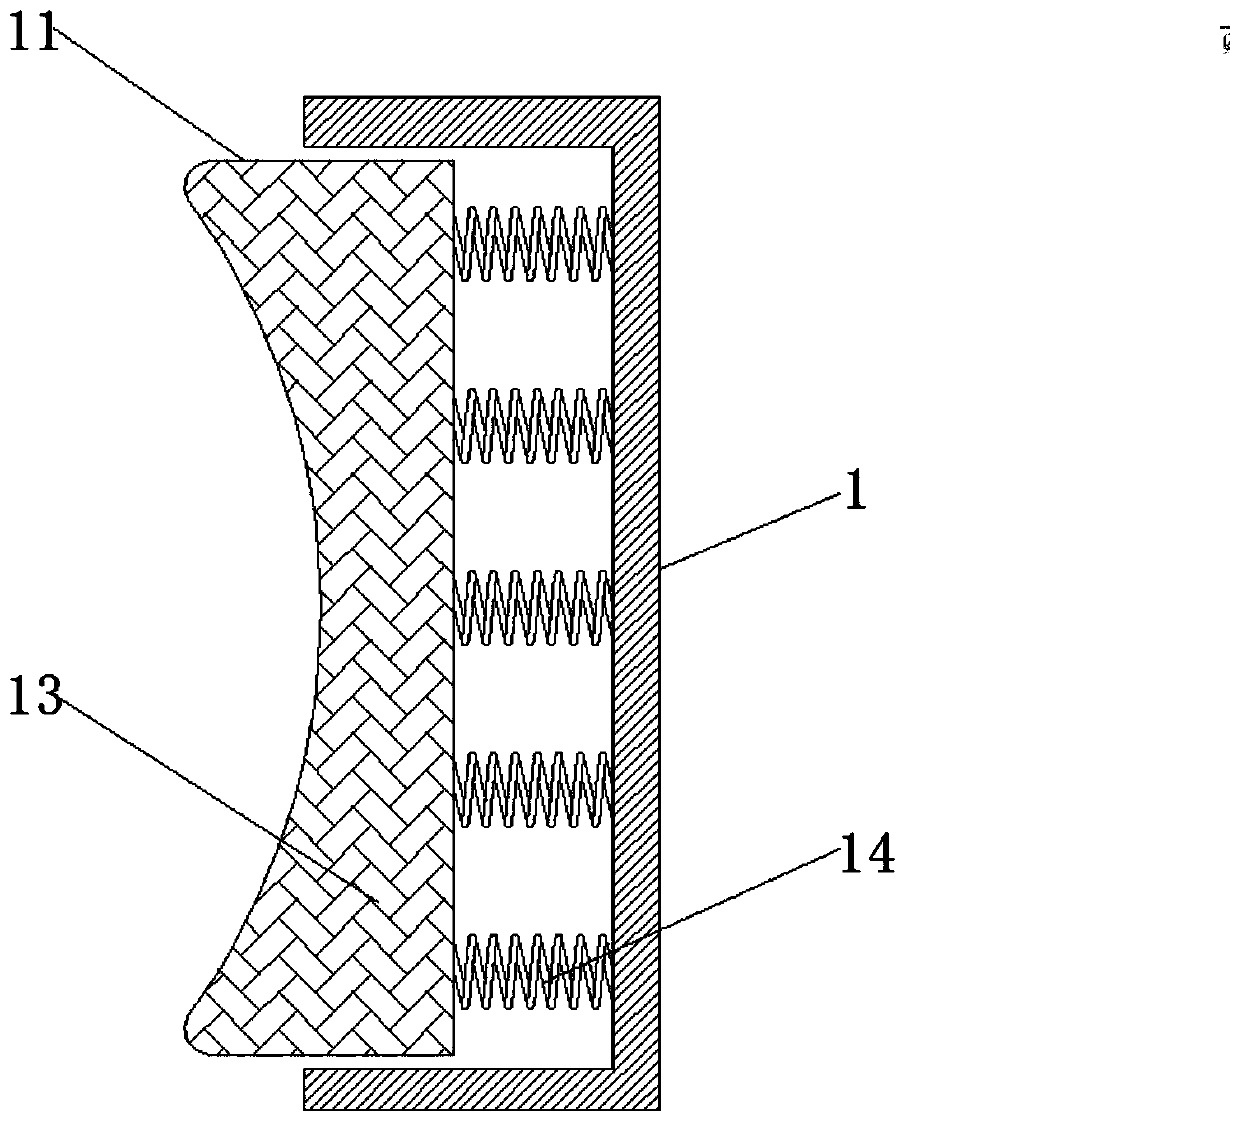 Sewage treatment device for collecting hair based on cam circulating oscillation